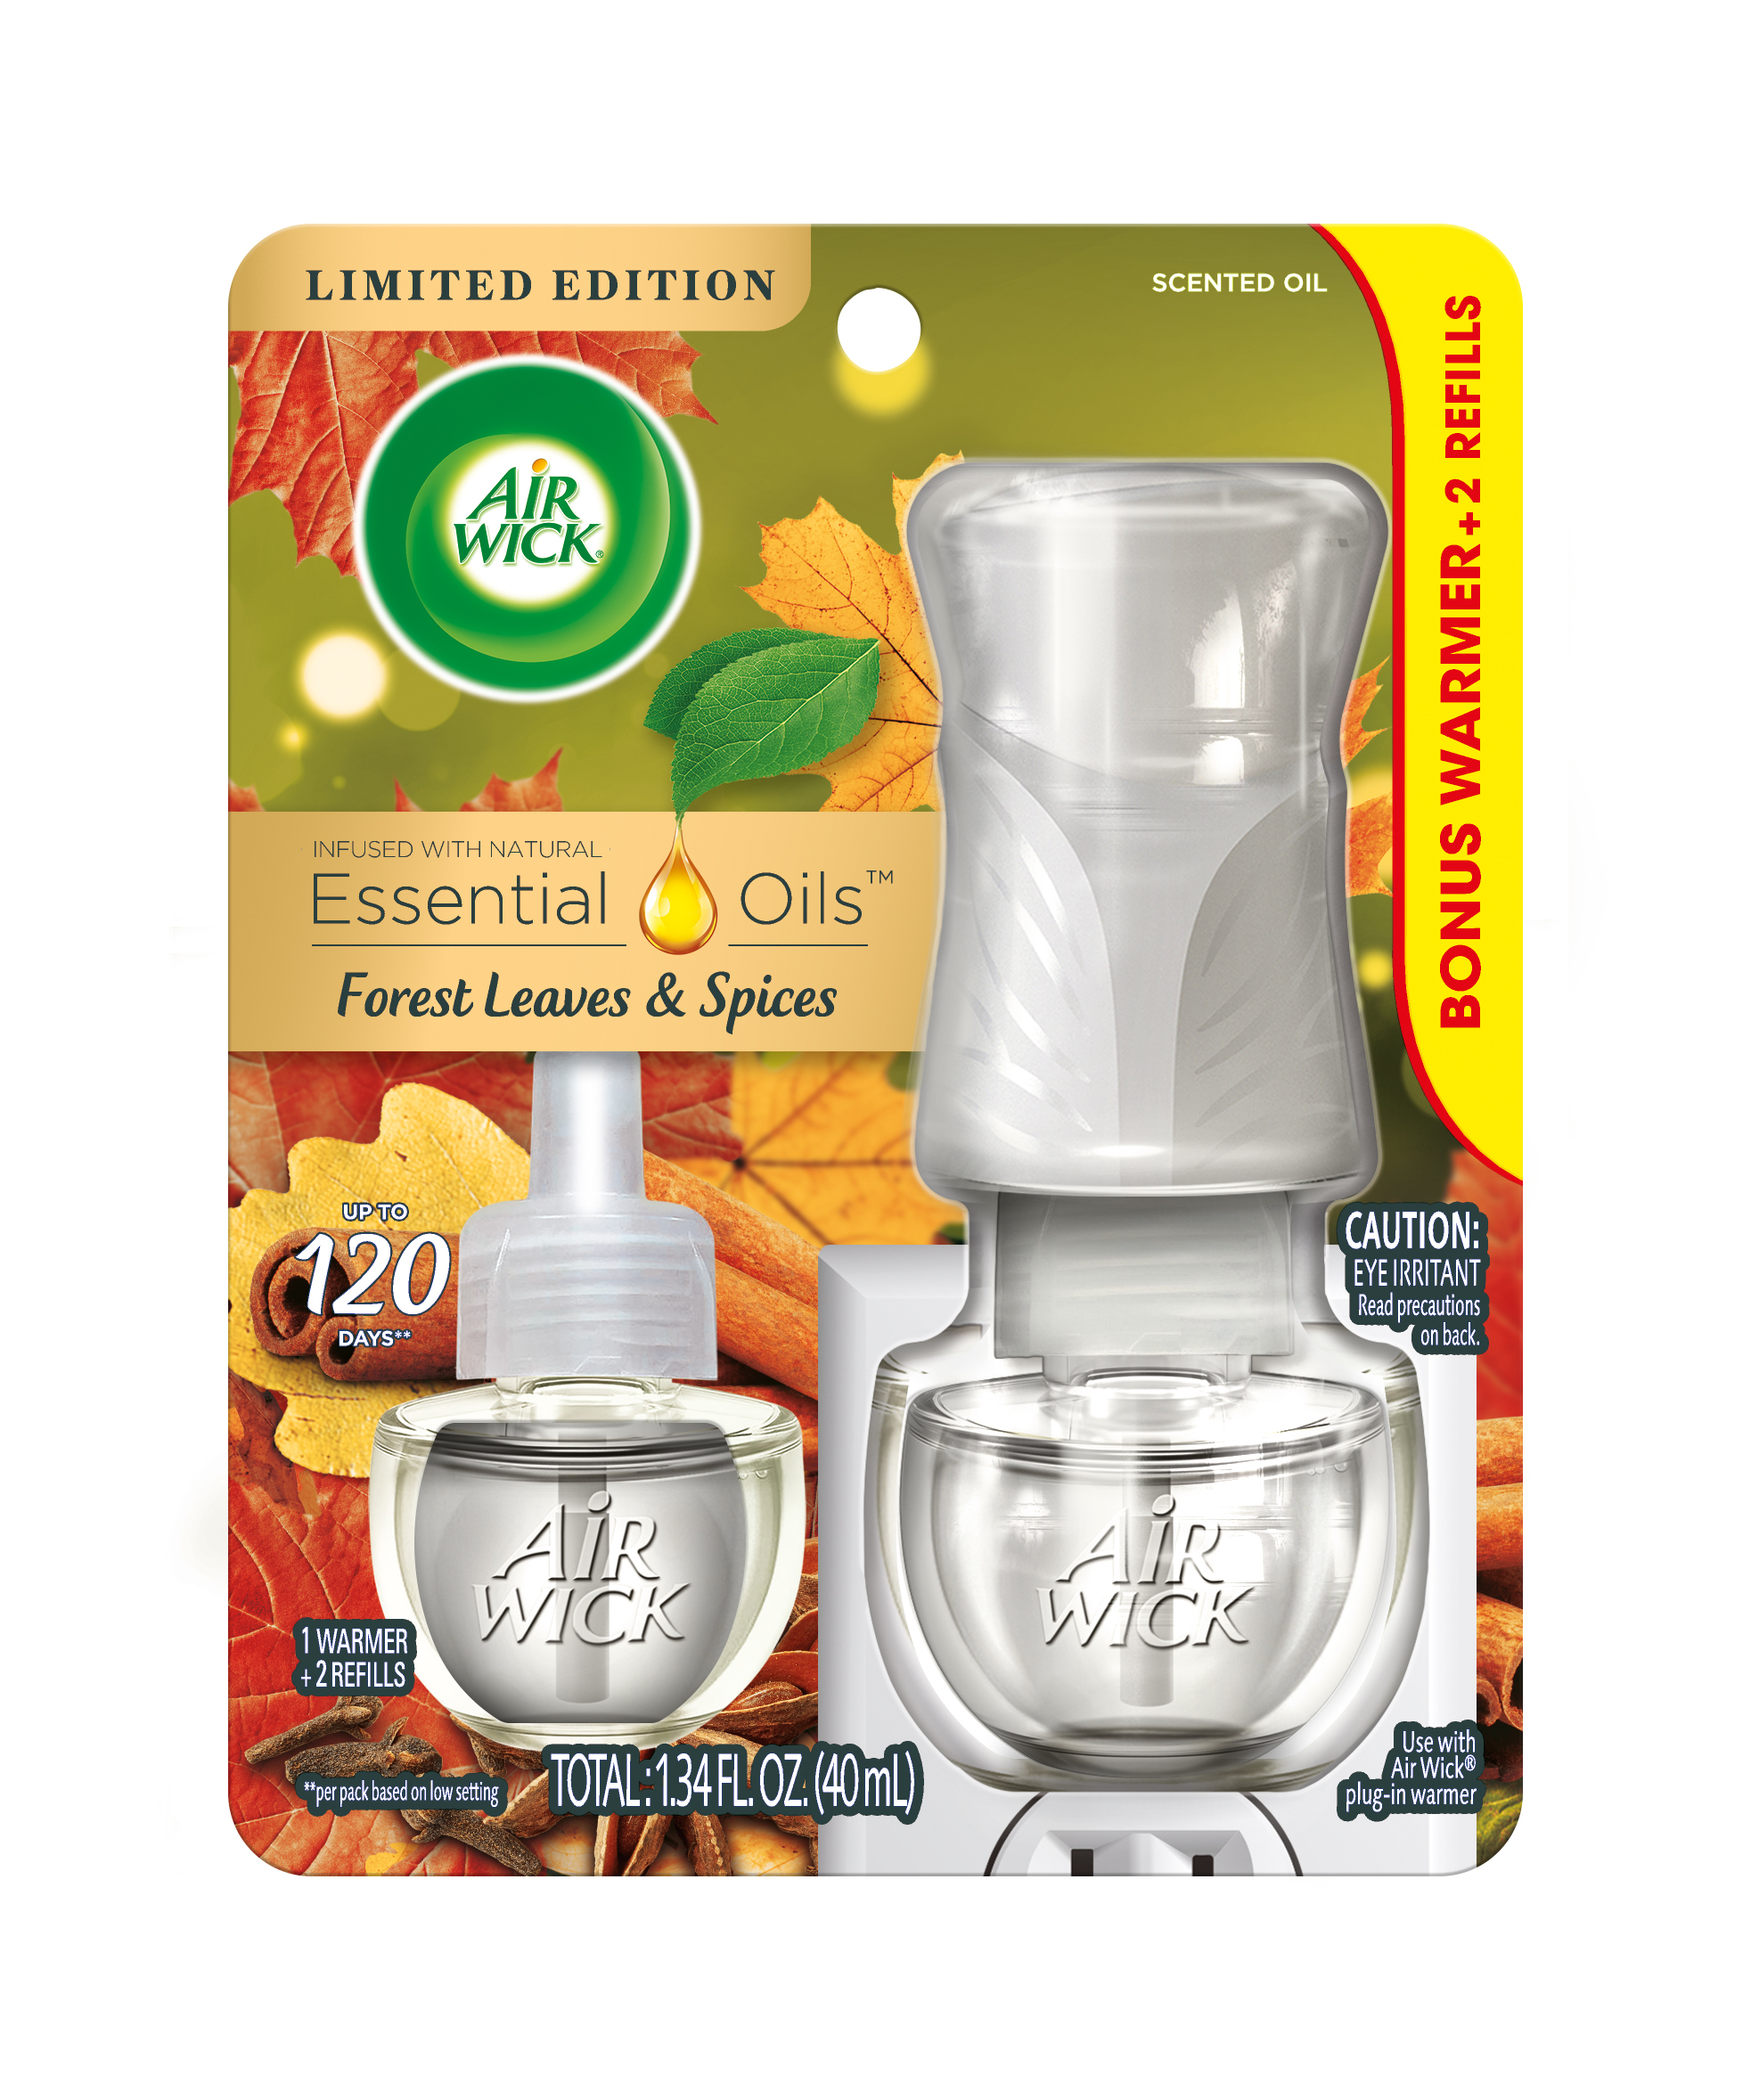 AIR WICK® Scented Oil - Forest Spice & Leaves - Kit